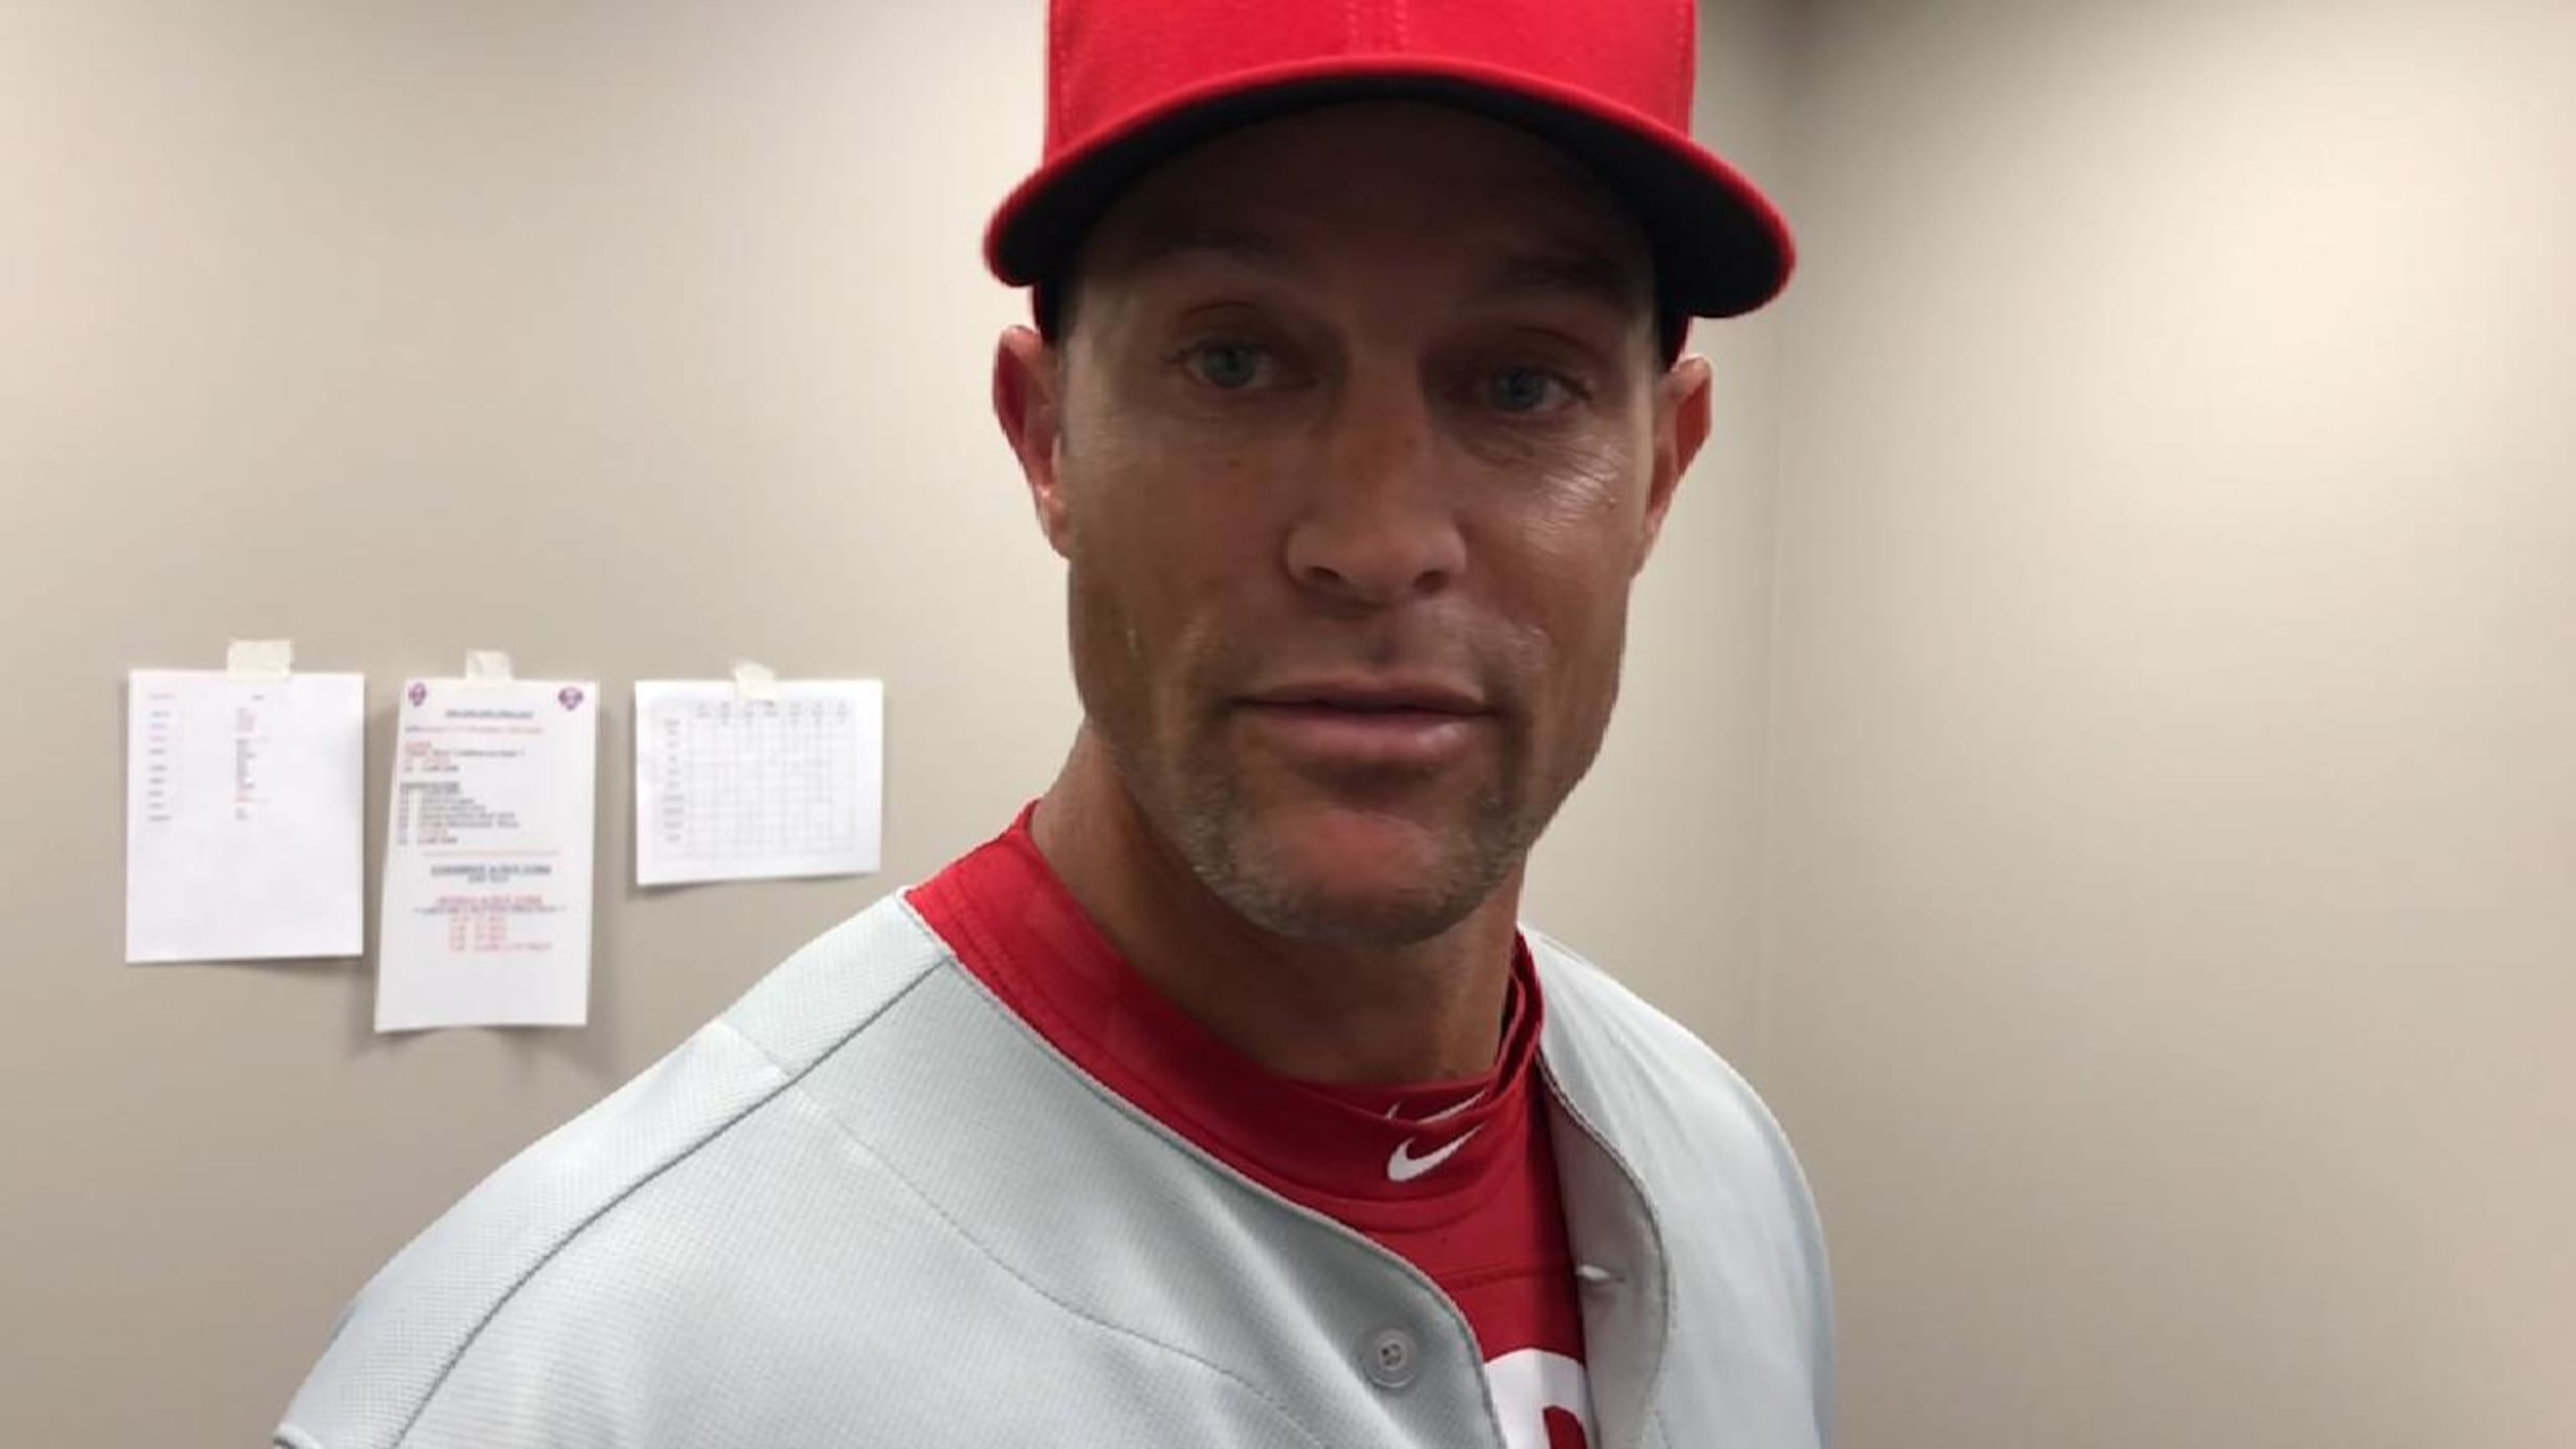 2021 Spring Training Cap - worn by #19 Gabe Kapler (2021 Manager of the  Year) - size 7 1/4